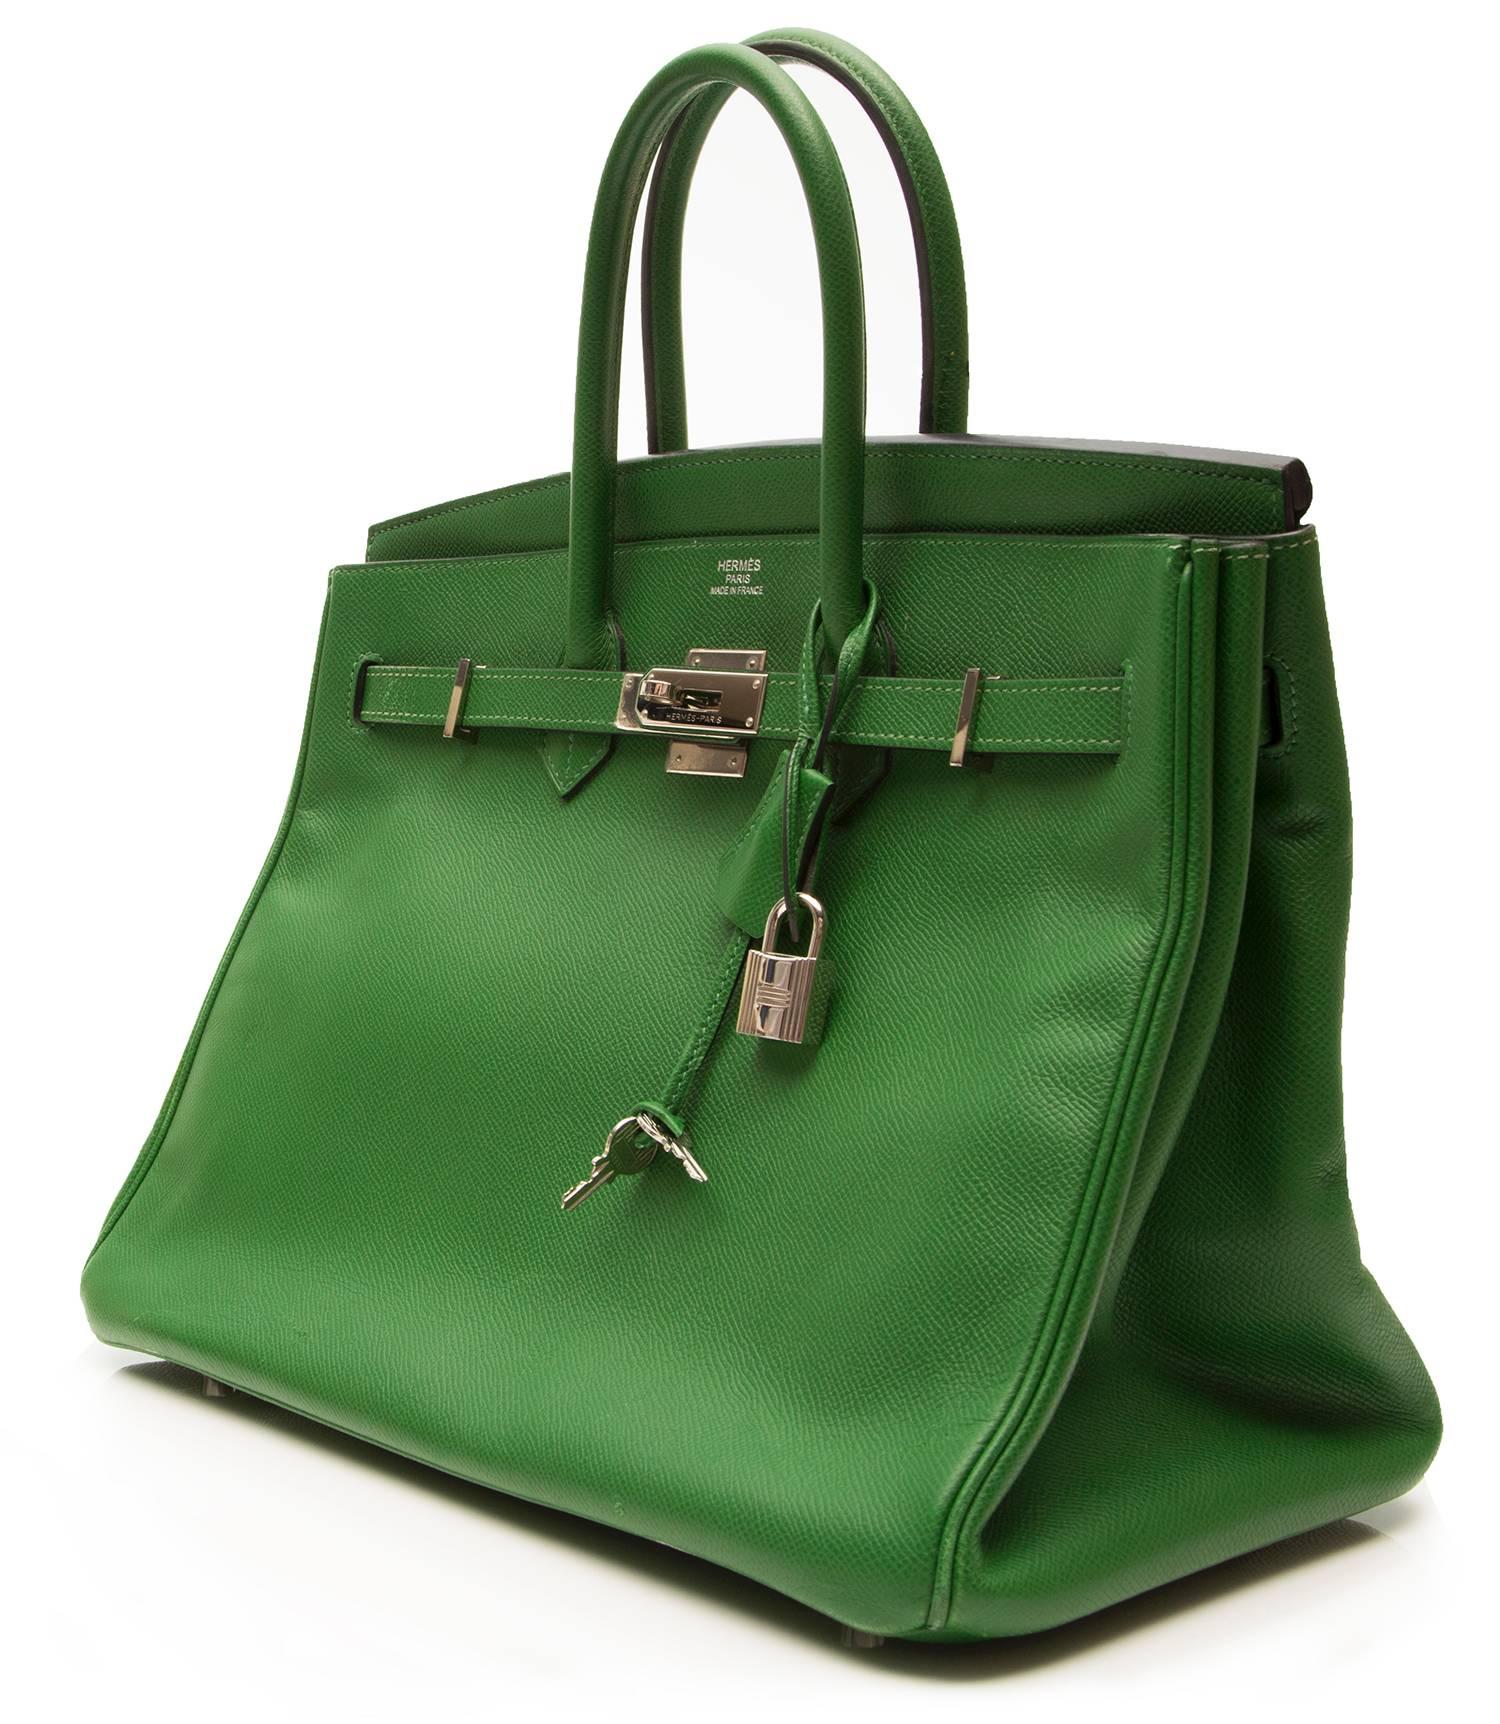 In a rare and enchantingly feminine shade of ​Green , this Hermès Birkin tote is a truly dazzling item. It is crafted from Epsom leather, a highly popular hide for its ability to retain its shape, and for its finely-grained embossed texture which